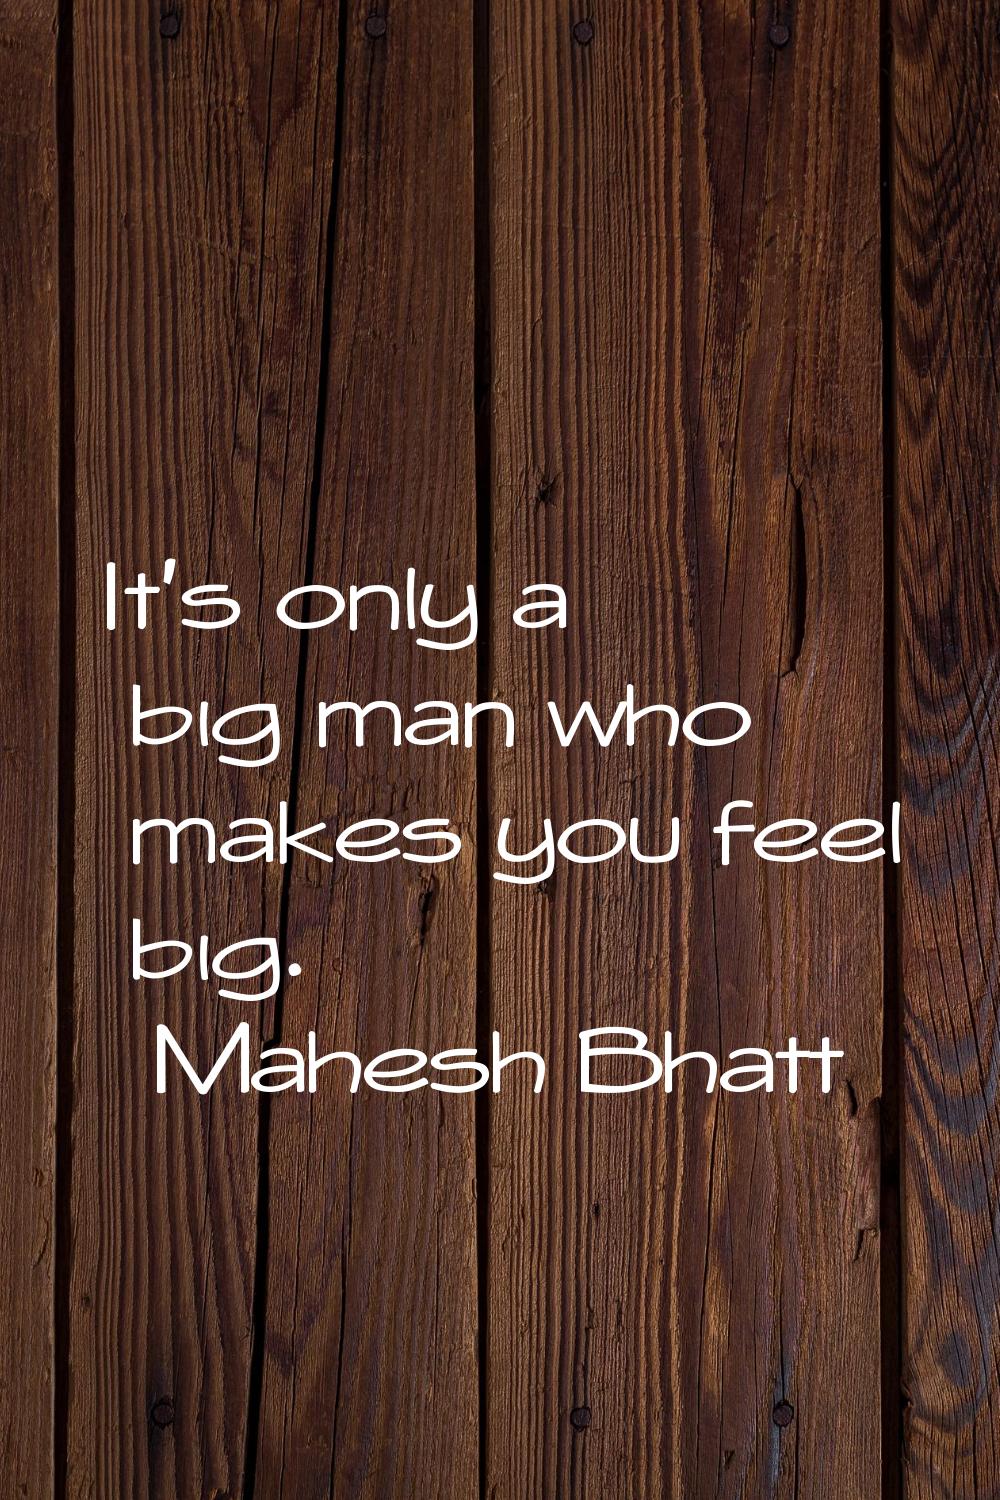 It's only a big man who makes you feel big.